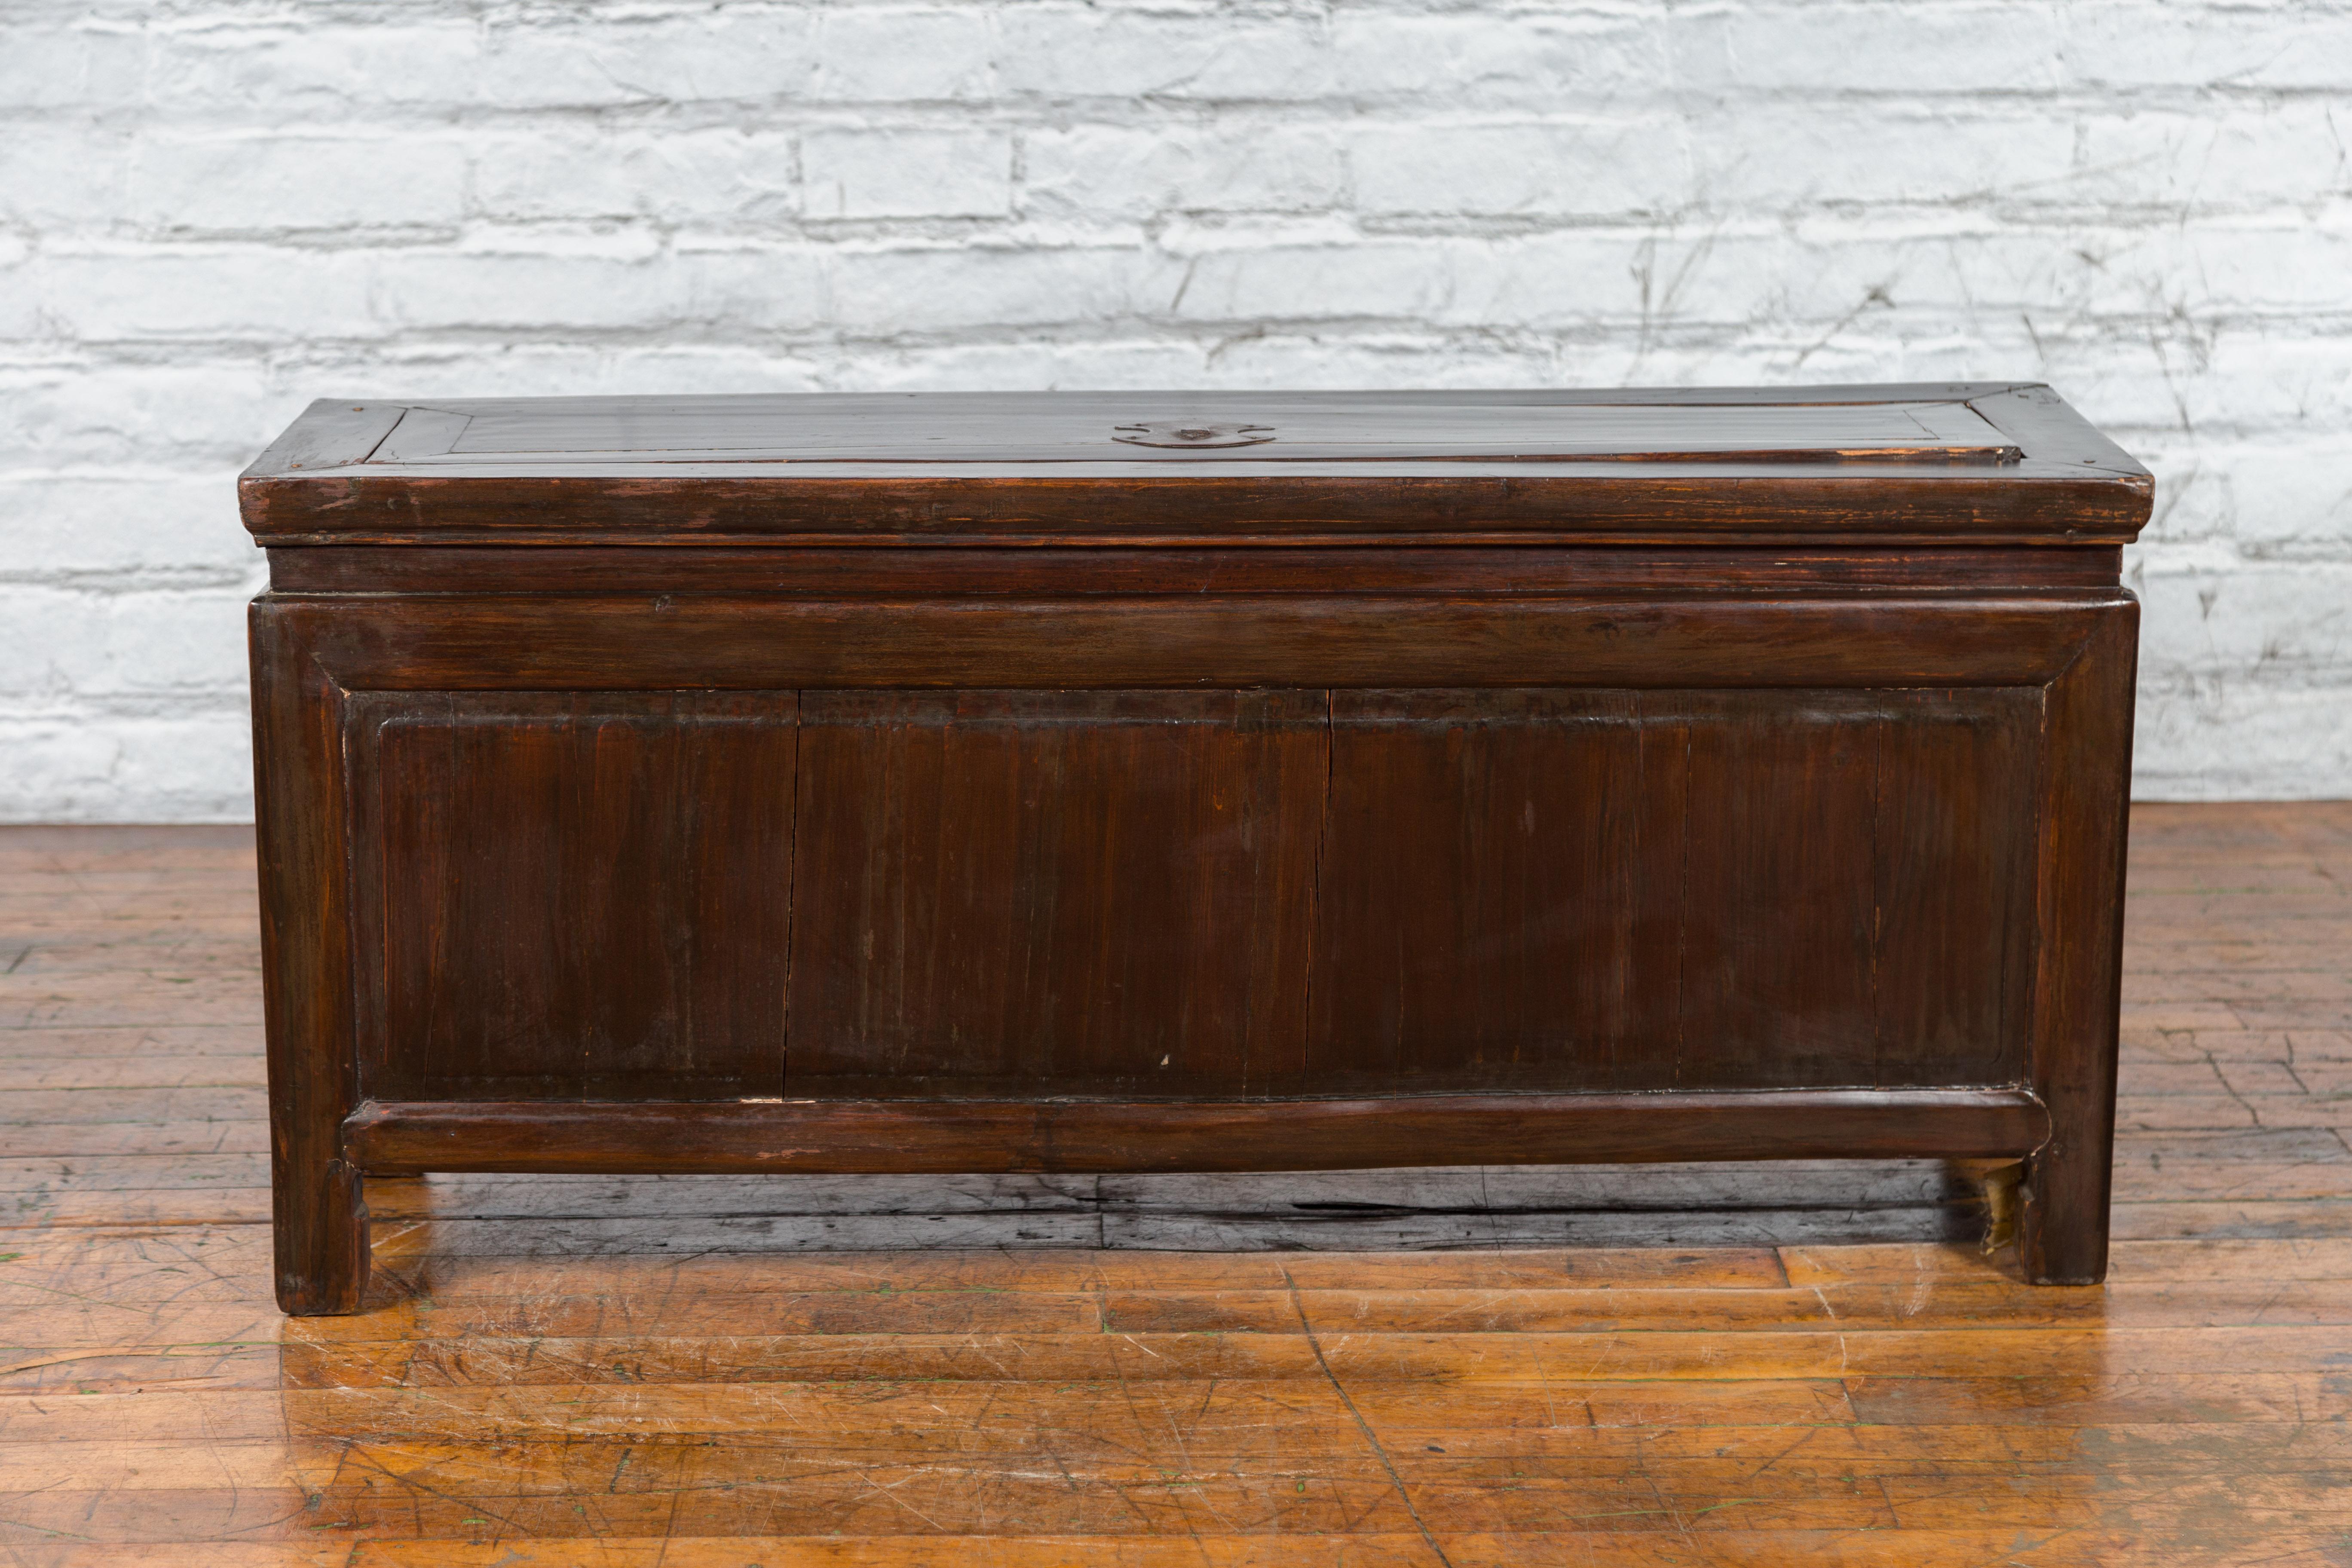 A Chinese antique Qing Dynasty period coffer from the 19th century, with brown lacquer, brass hardware, horse hoof feet and rustic appeal. Created in China during the Qing Dynasty period in the 19th century, this coffer features a long rectangular